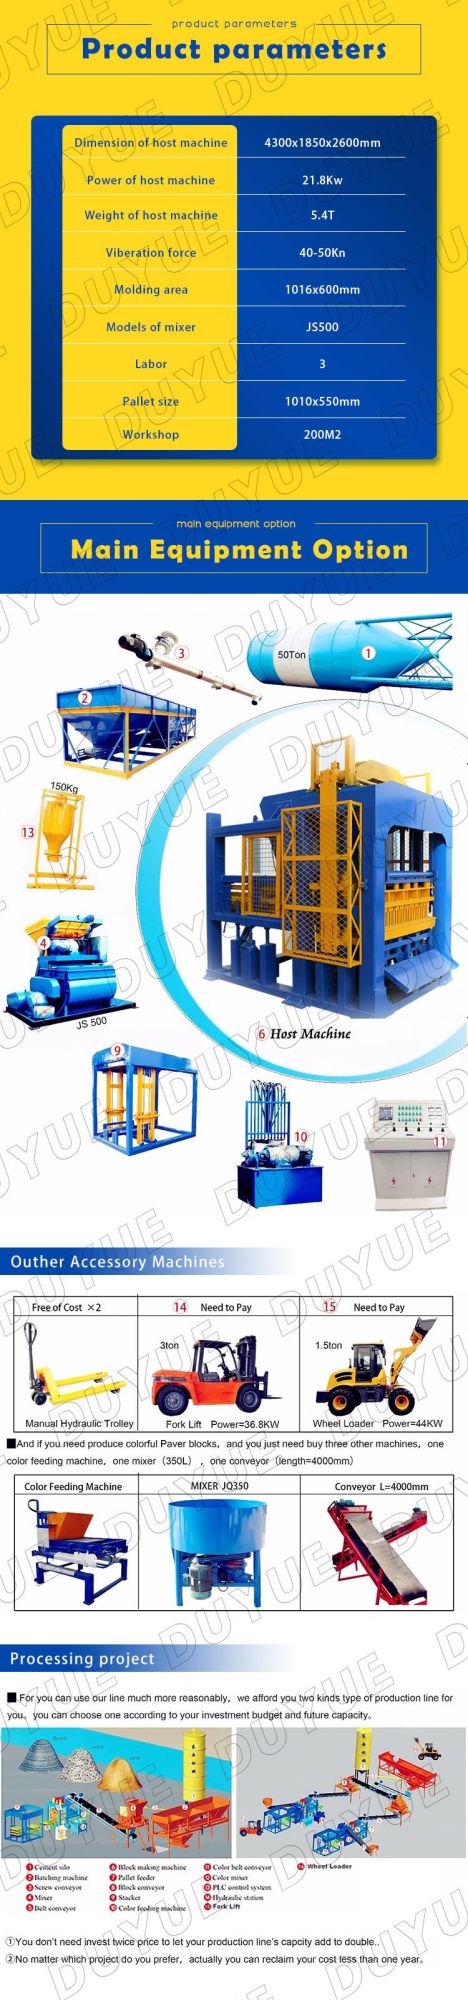 Qt4-15 Fully Automatic Paver Block and Hollow Brick Making Machine in Kenya